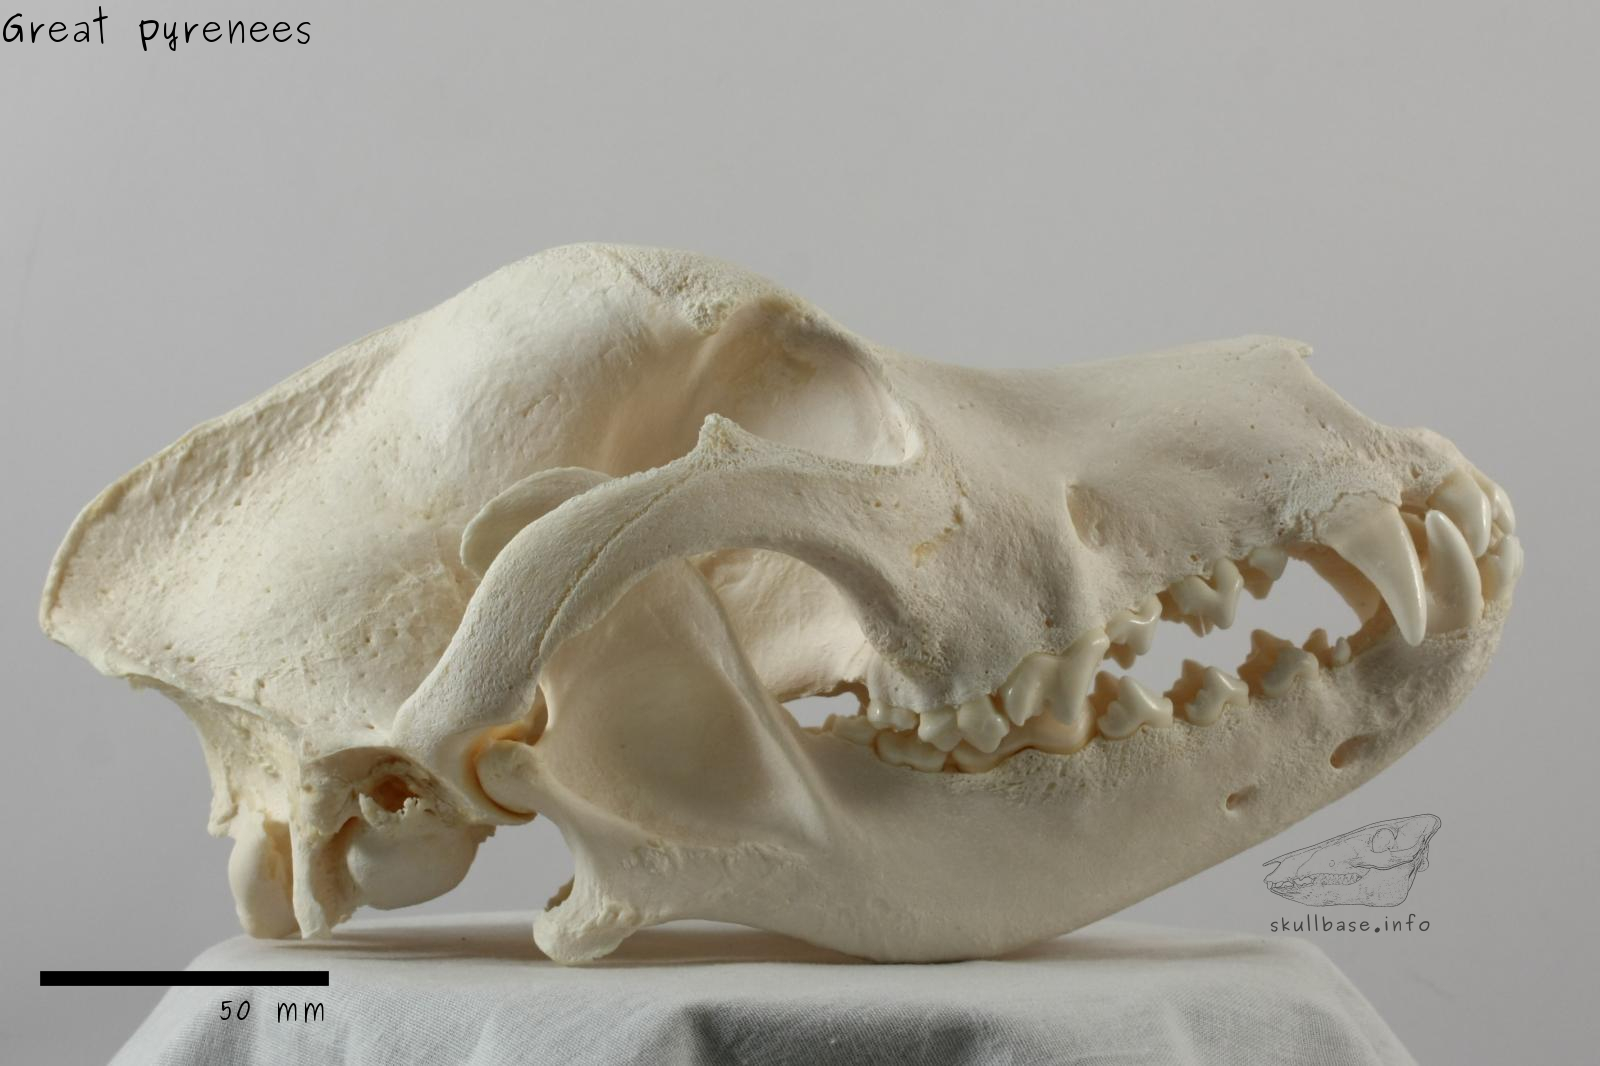 Great pyrenees (Canis lupus familiaris) skull lateral view